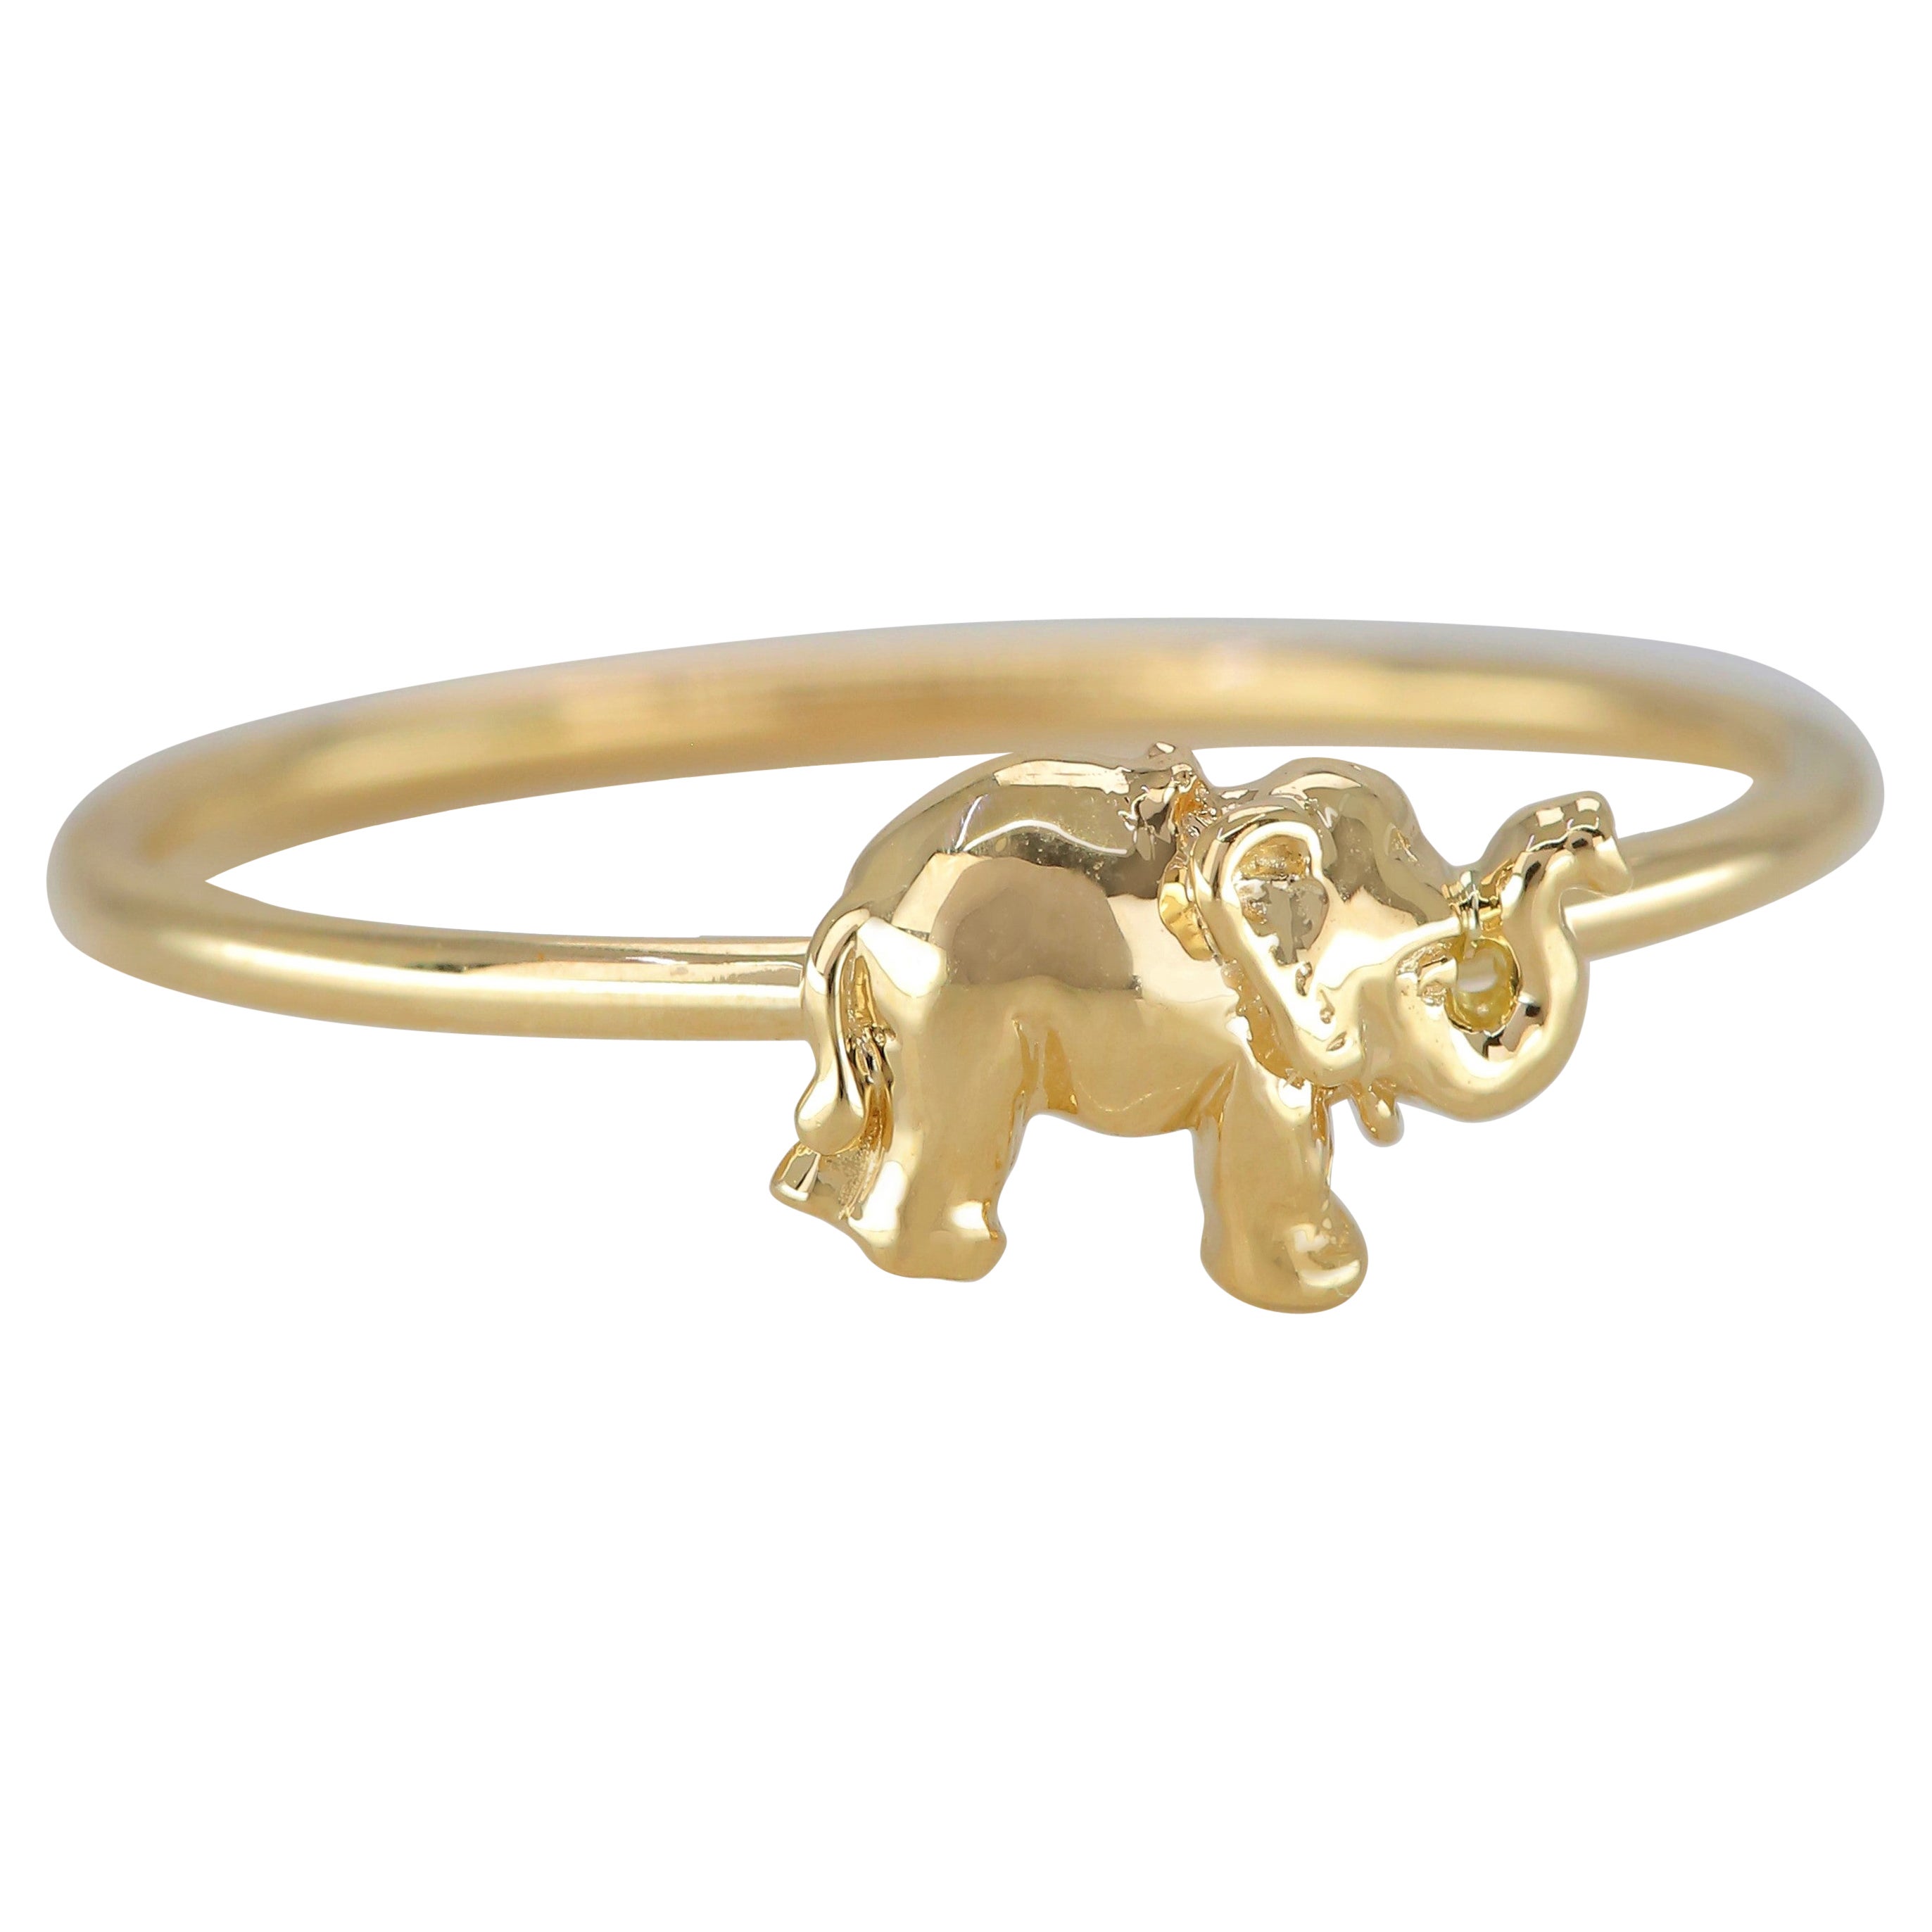 Hurrybuy Women Cute Elephant/Bee/Sunflower Alloy Ring Wedding Party Jewelry Cocktail Birthday Gift Ring 